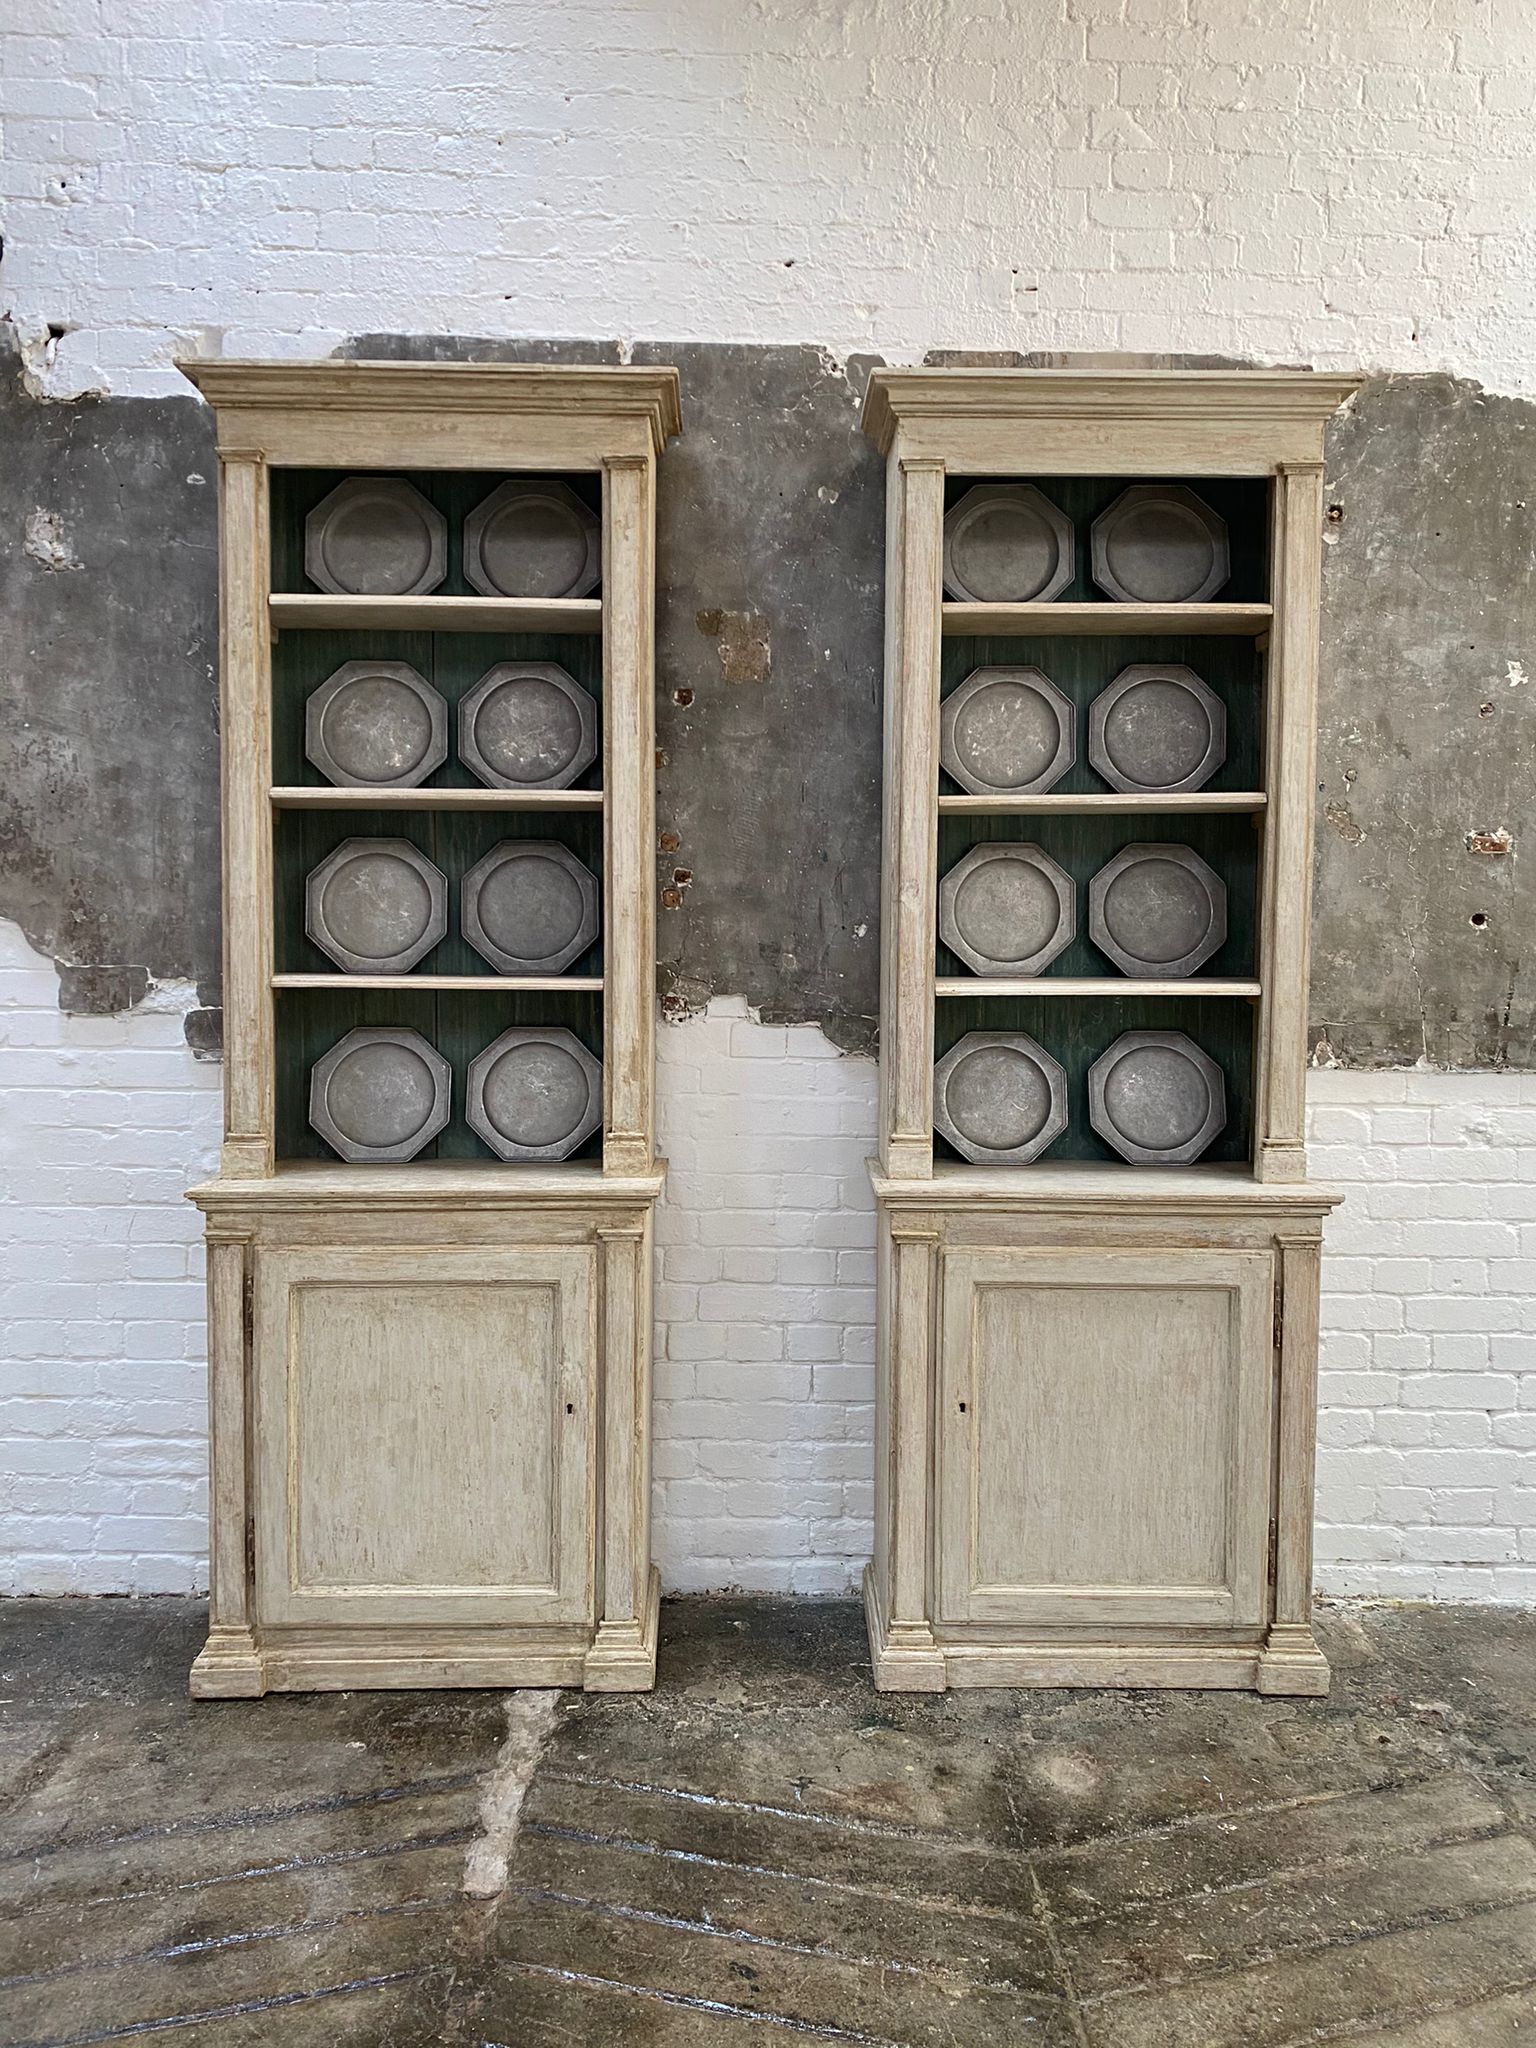 A wonderful pair of tall bookcases, French, dating from the late 19th century. 
The bookcases have four shelves that are removable. The cupboard base with single shelf enclosed, has the original lock and keys. 
The original paint finish has been